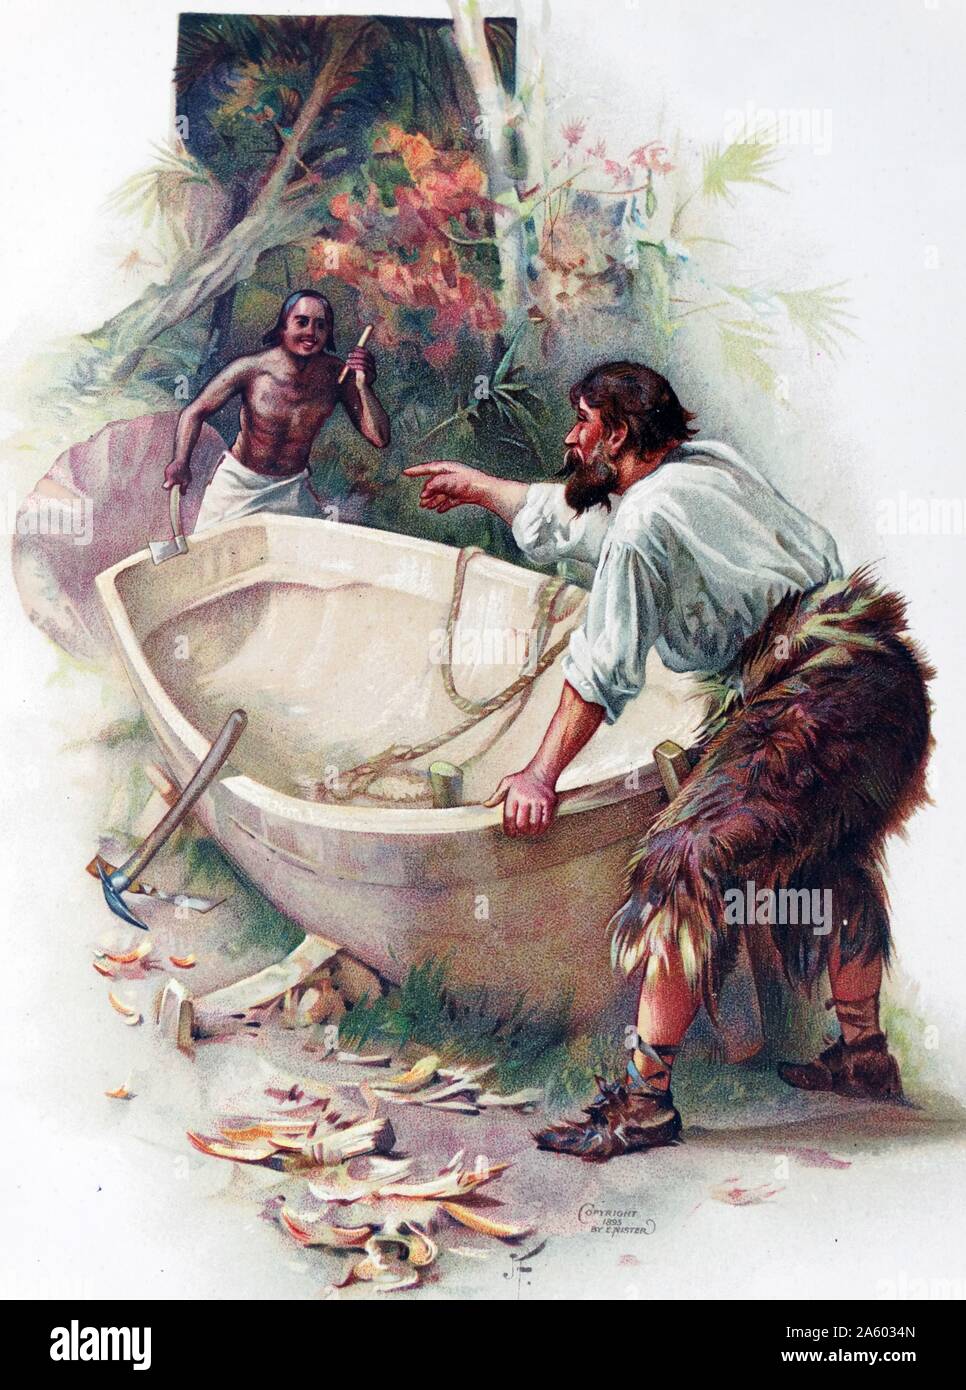 Illustration from a nineteenth century edition of 'Robinson Crusoe' a novel by Daniel Defoe. The book was first published on 25 April 1719. It relates the story of Robinson Crusoe, stranded on a desert Island for 28 years and his subsequent fight for survival. Stock Photo